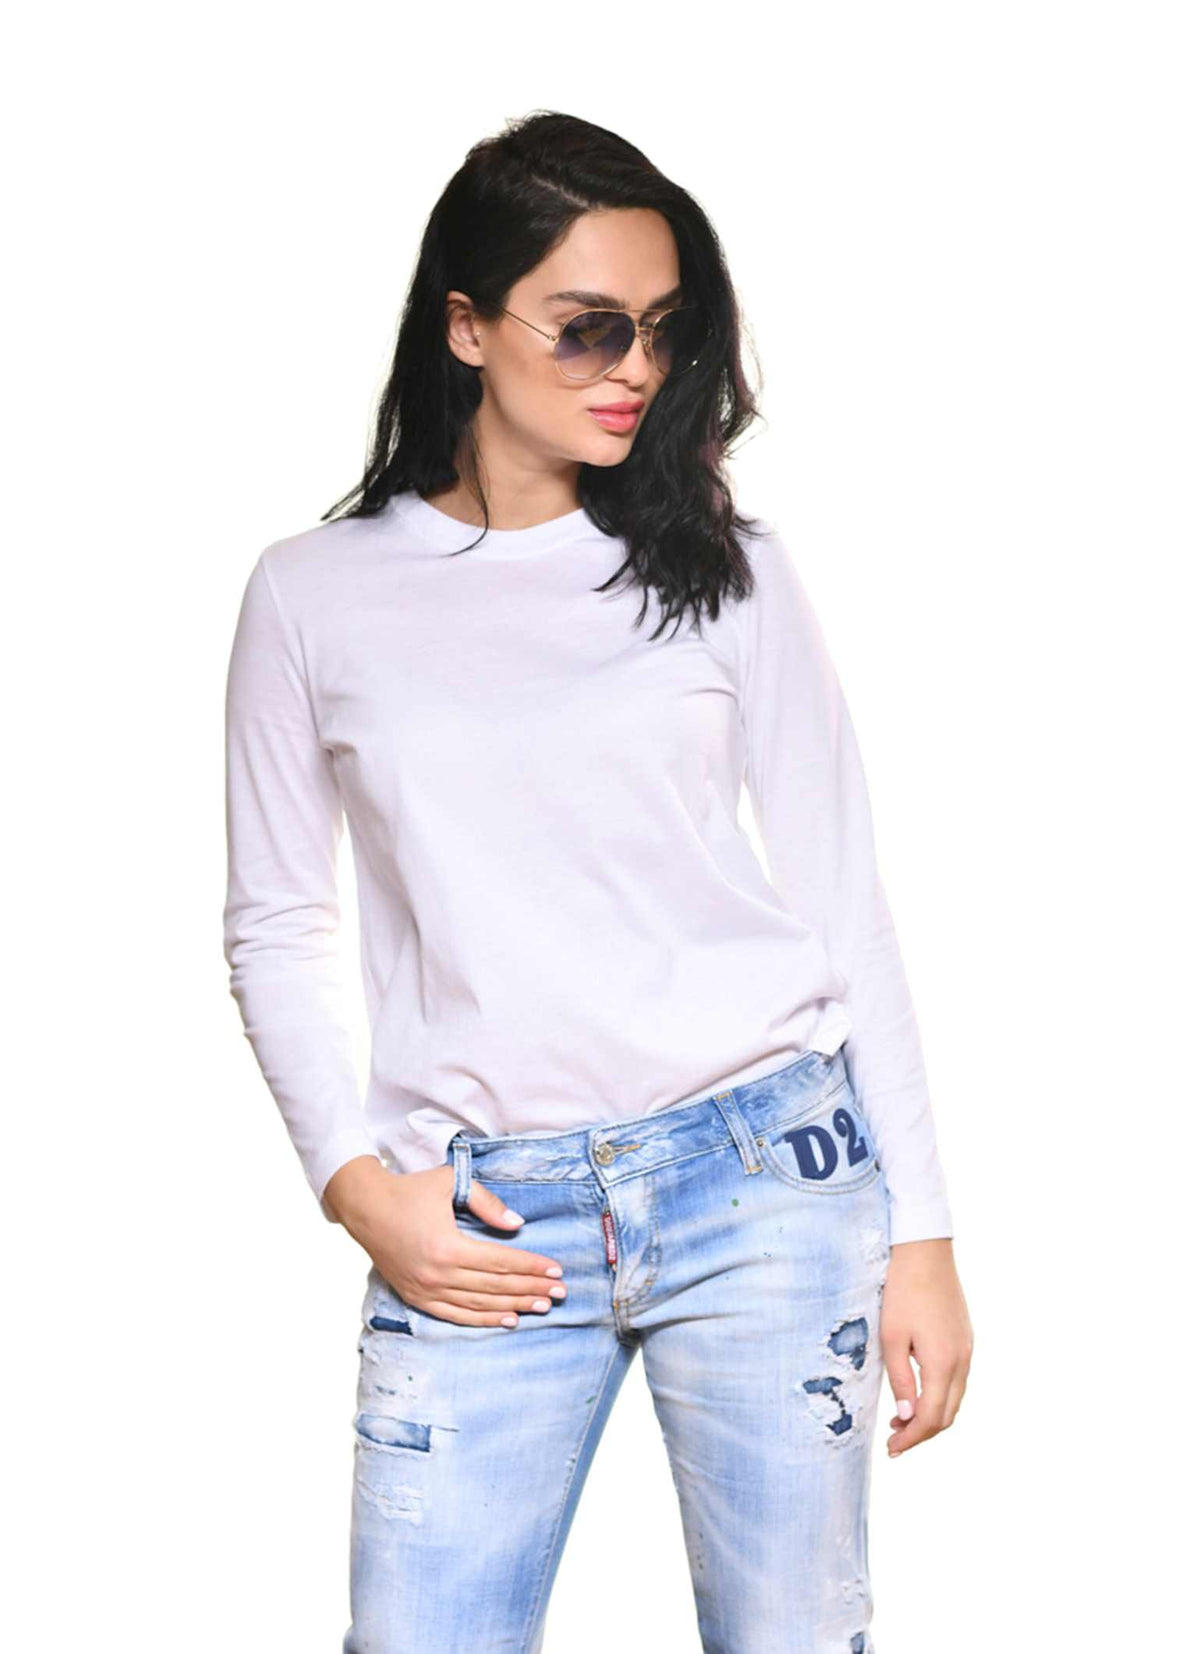 Long sleeve round neck tee shirts for women in color white